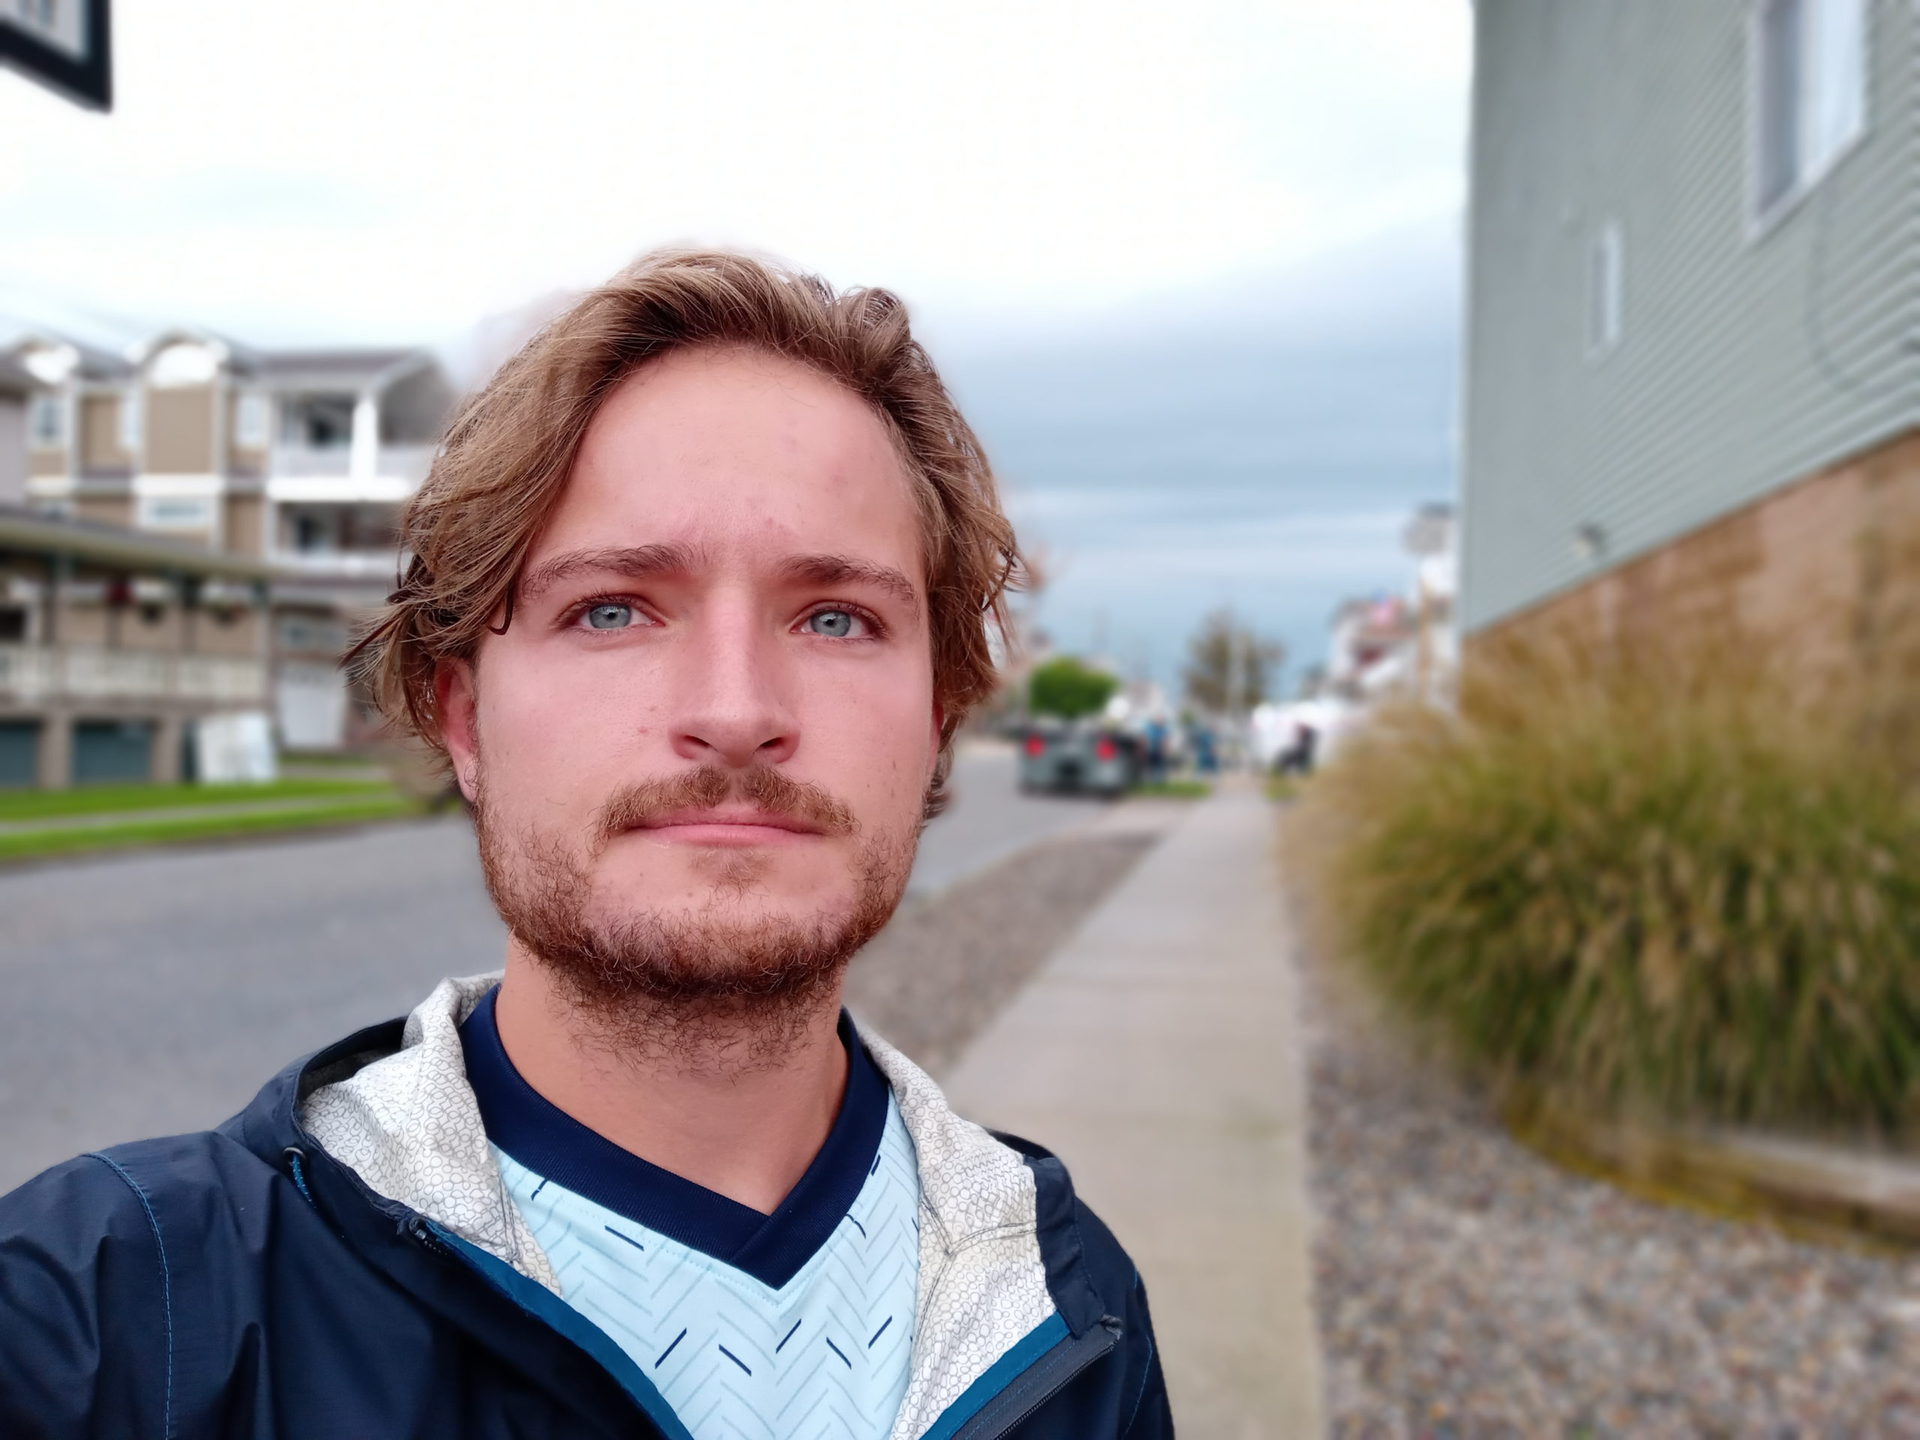 A portrait selfie taken with the LG K51 showing a man with light hair and facial hair wearing a white and blue t-shirt with a blue jacket over the top